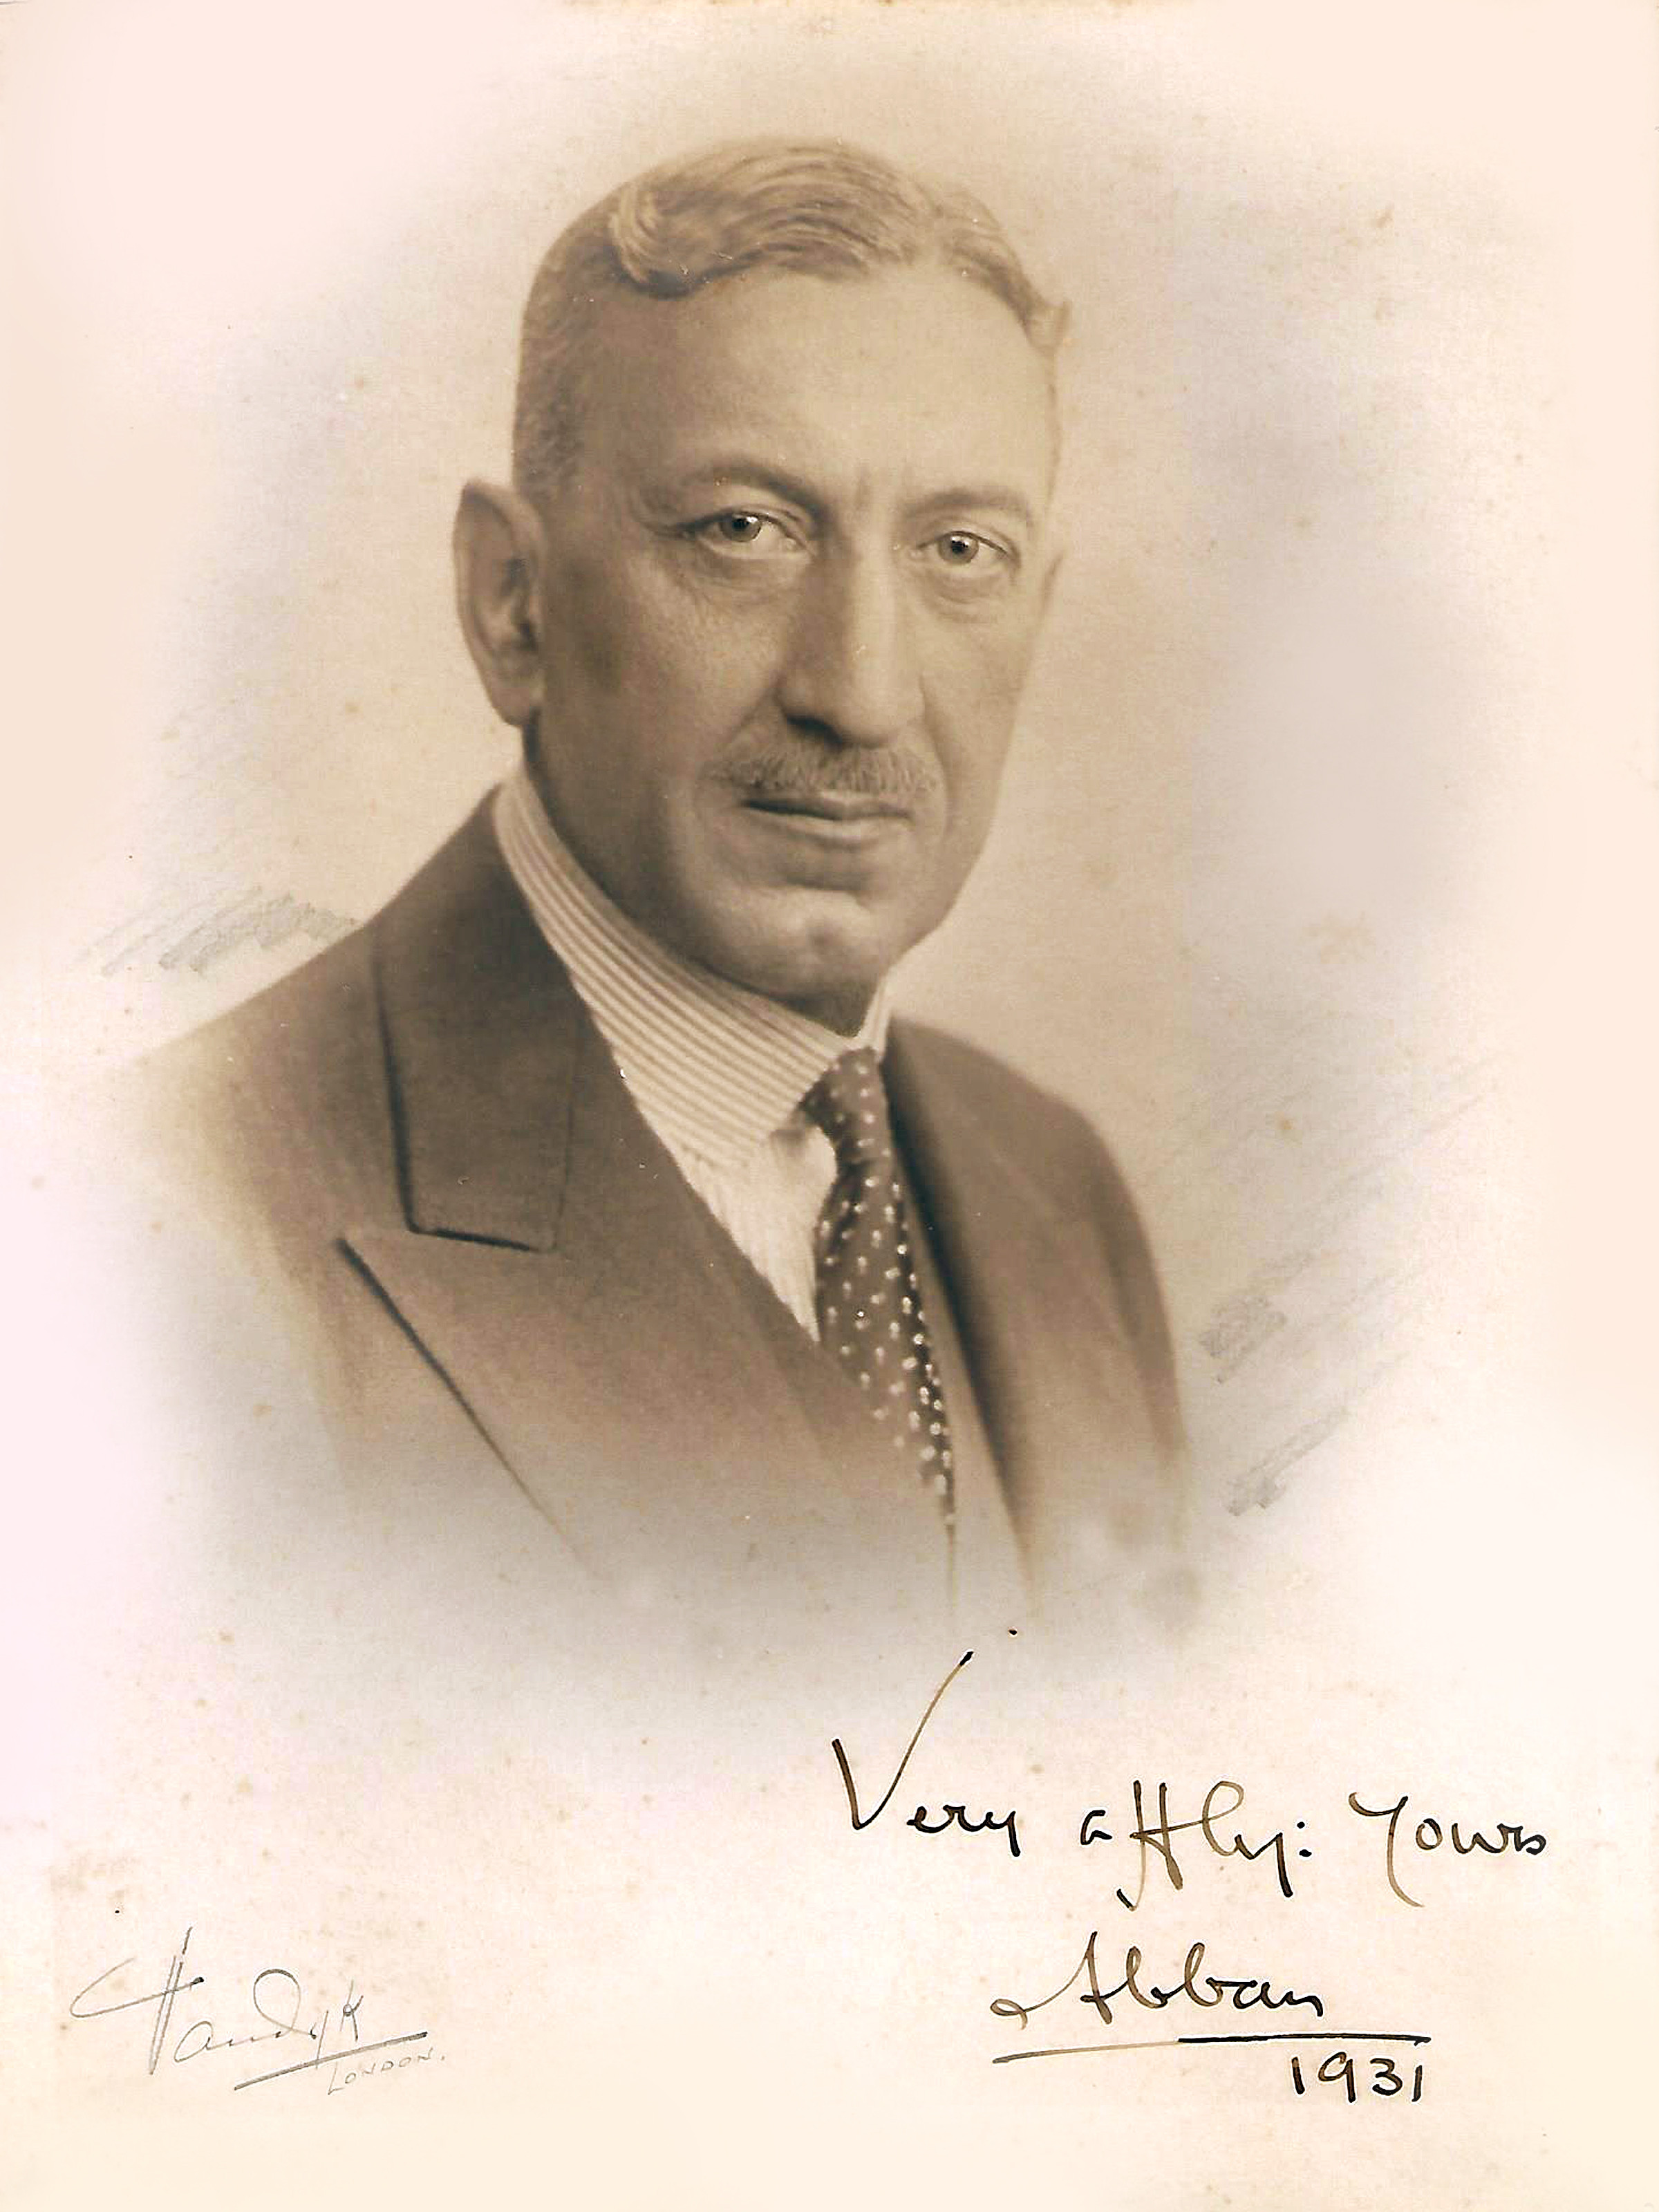 Autographed portrait of Sir Samad, taken at the famous Vandyk Studios in London while he was attending the Third Round Table Conference in 1932.